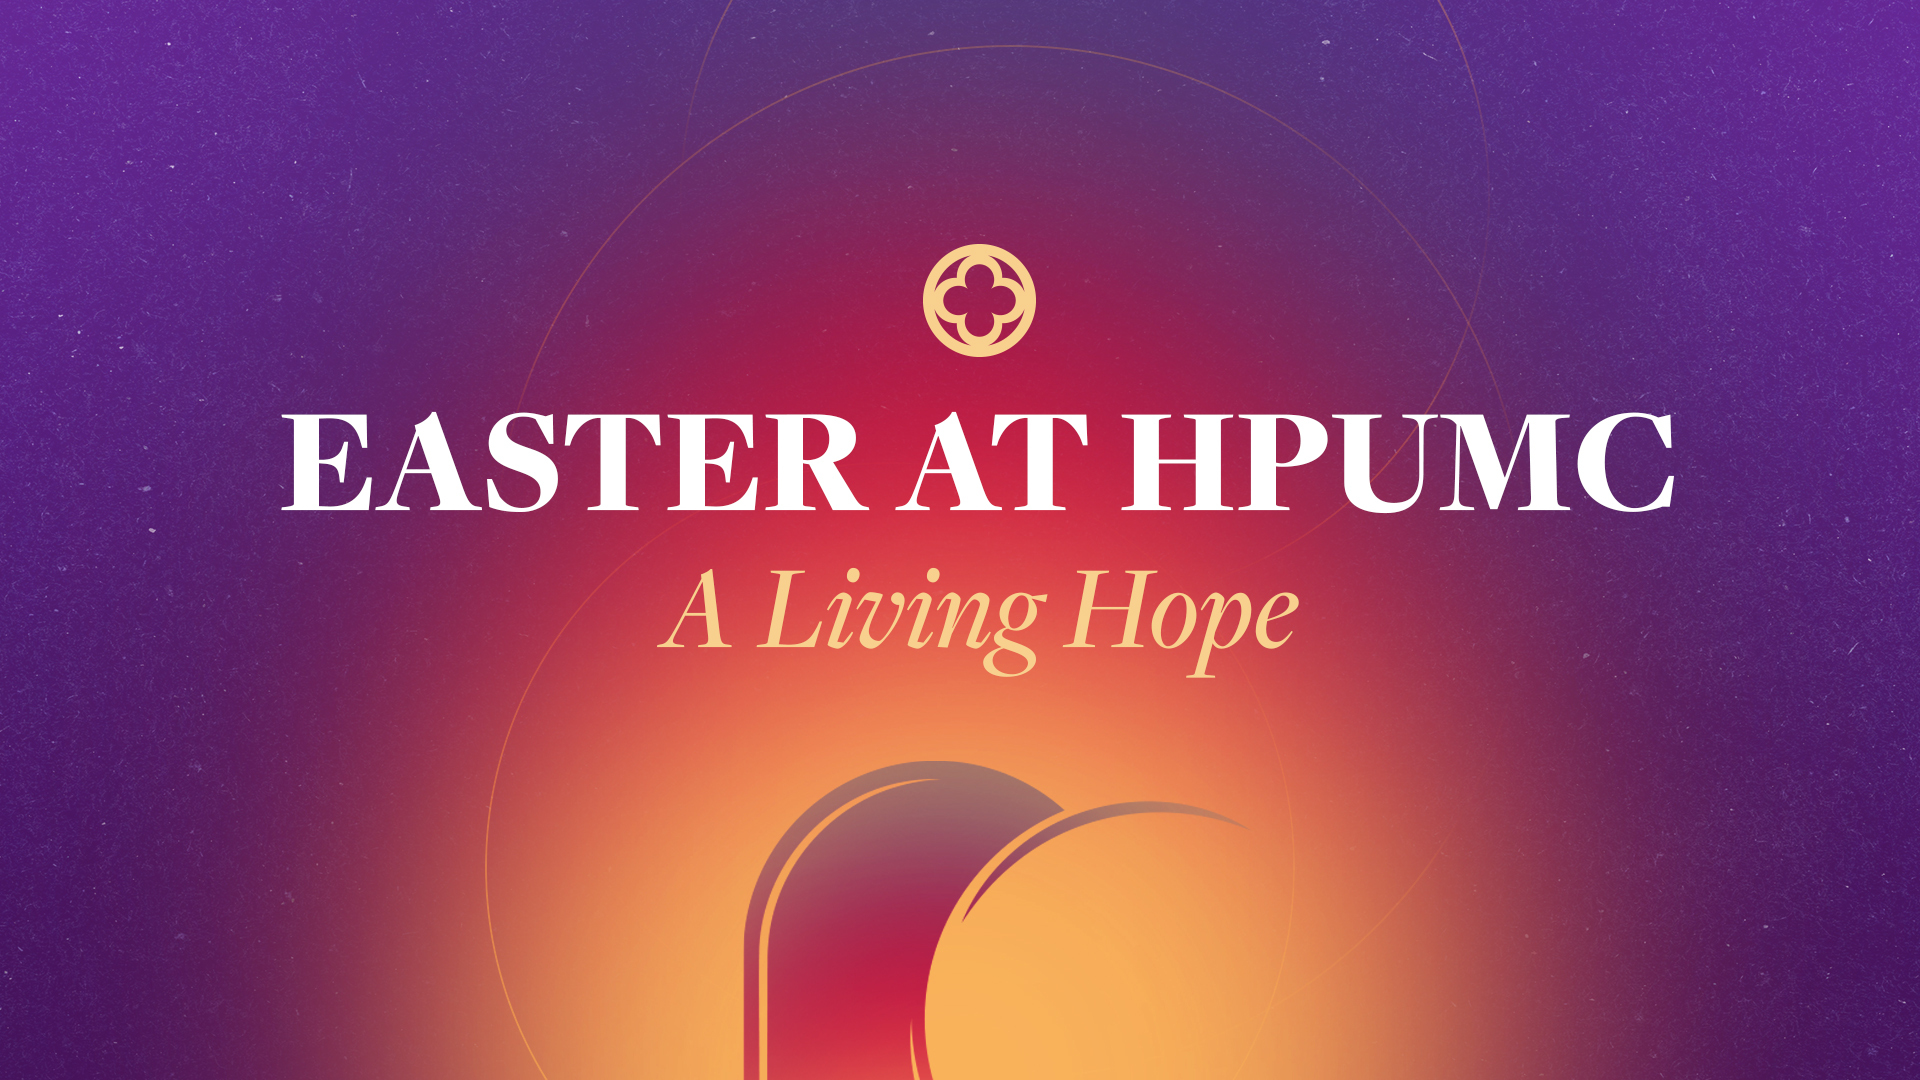 Easter at HPUMC | A Living Hope